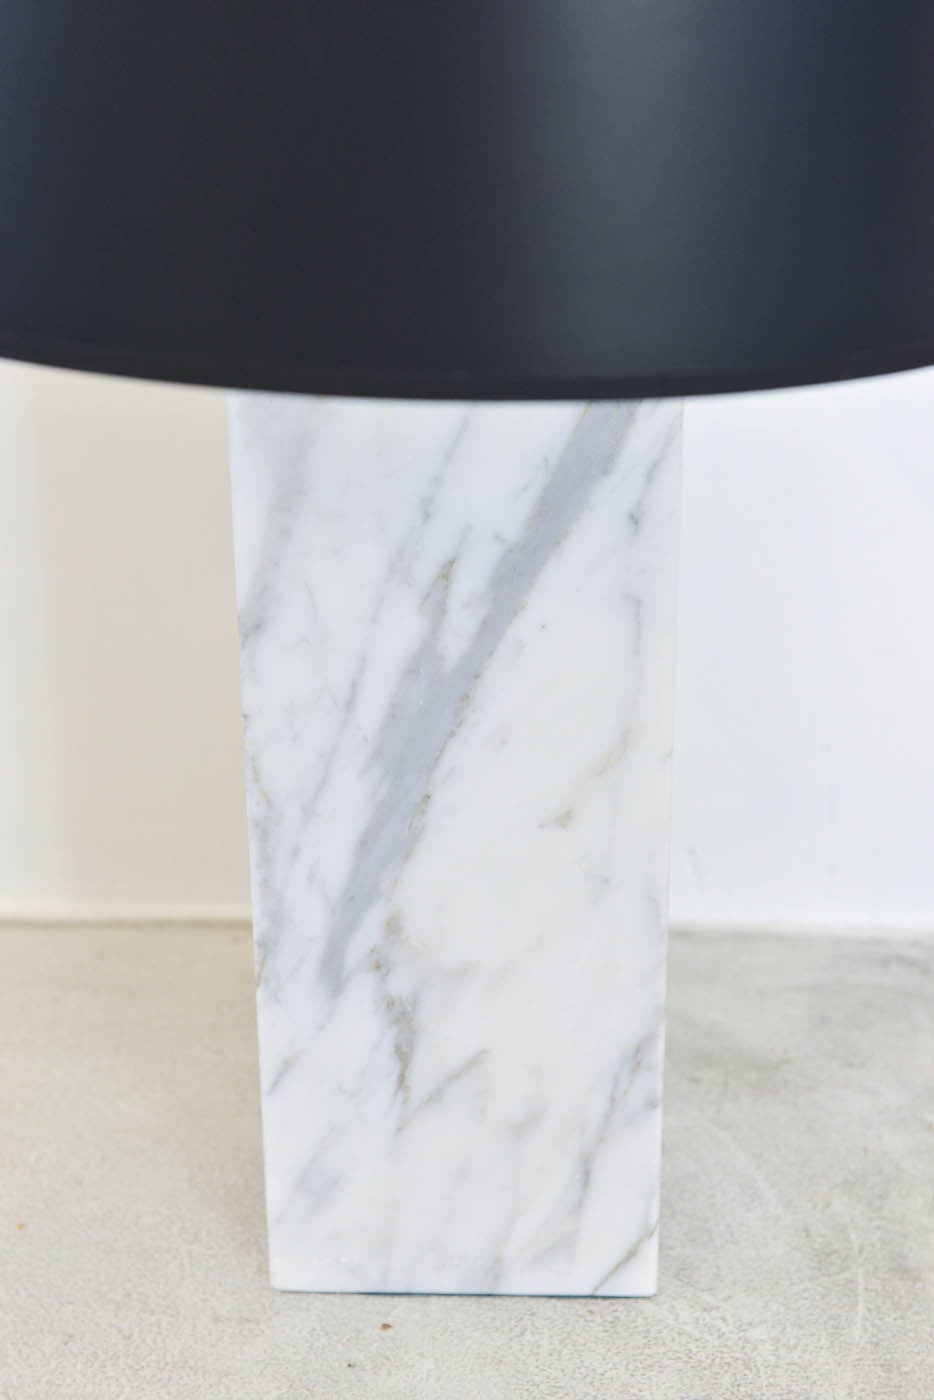 A stunning and extremely heavy and solid marble column table lamp in the style of Robert Sonneman, Nessen Studios or Robsjohn-Gibbings. This solid lamp has beautiful white carrera marble with lovely graining throughout and has a custom made black